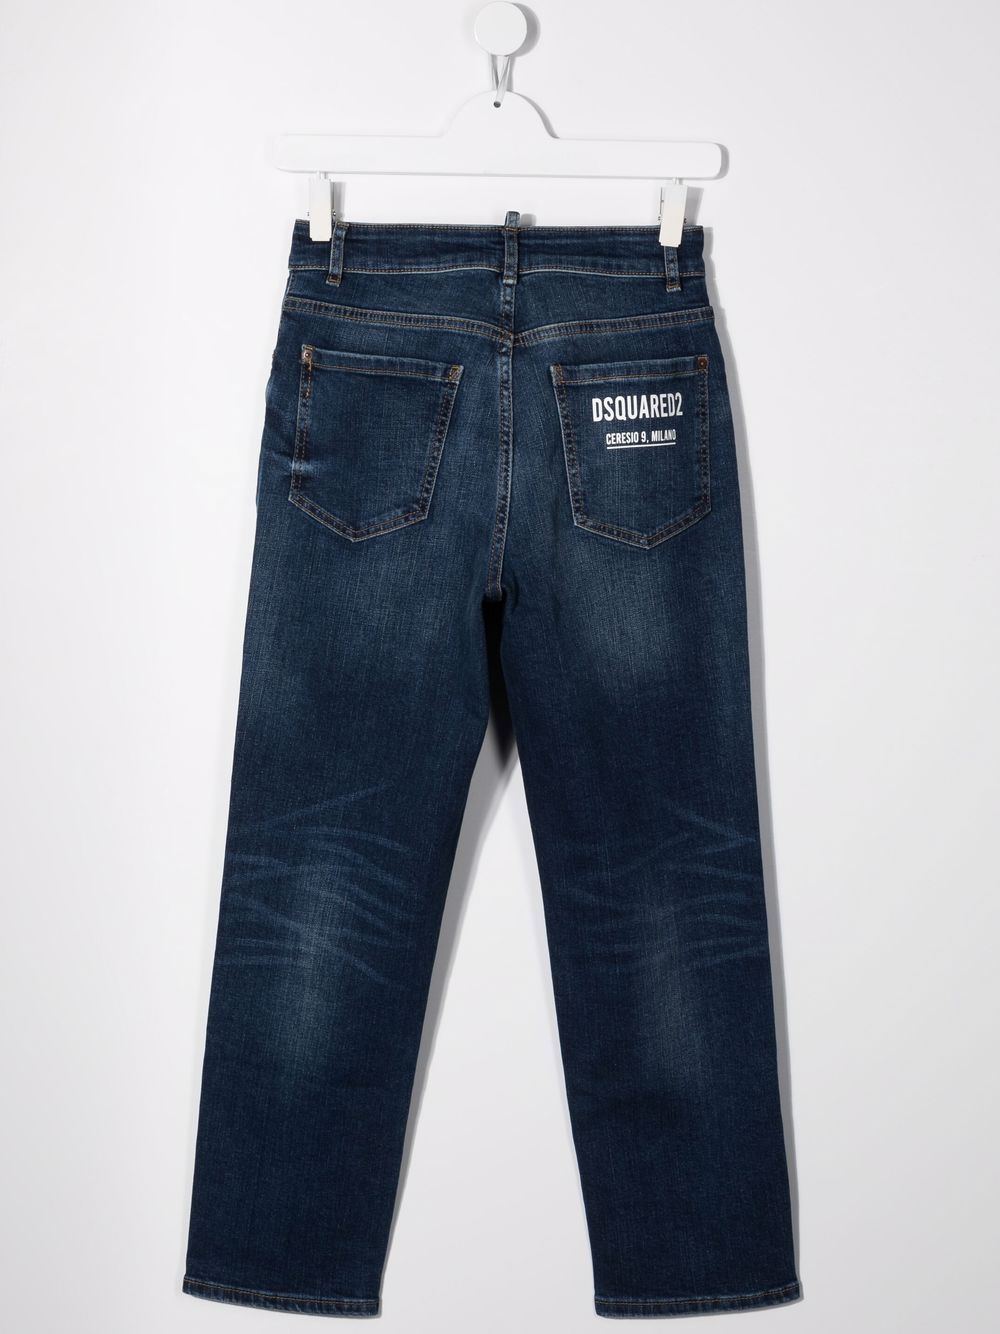 Blue jeans for boys with logo